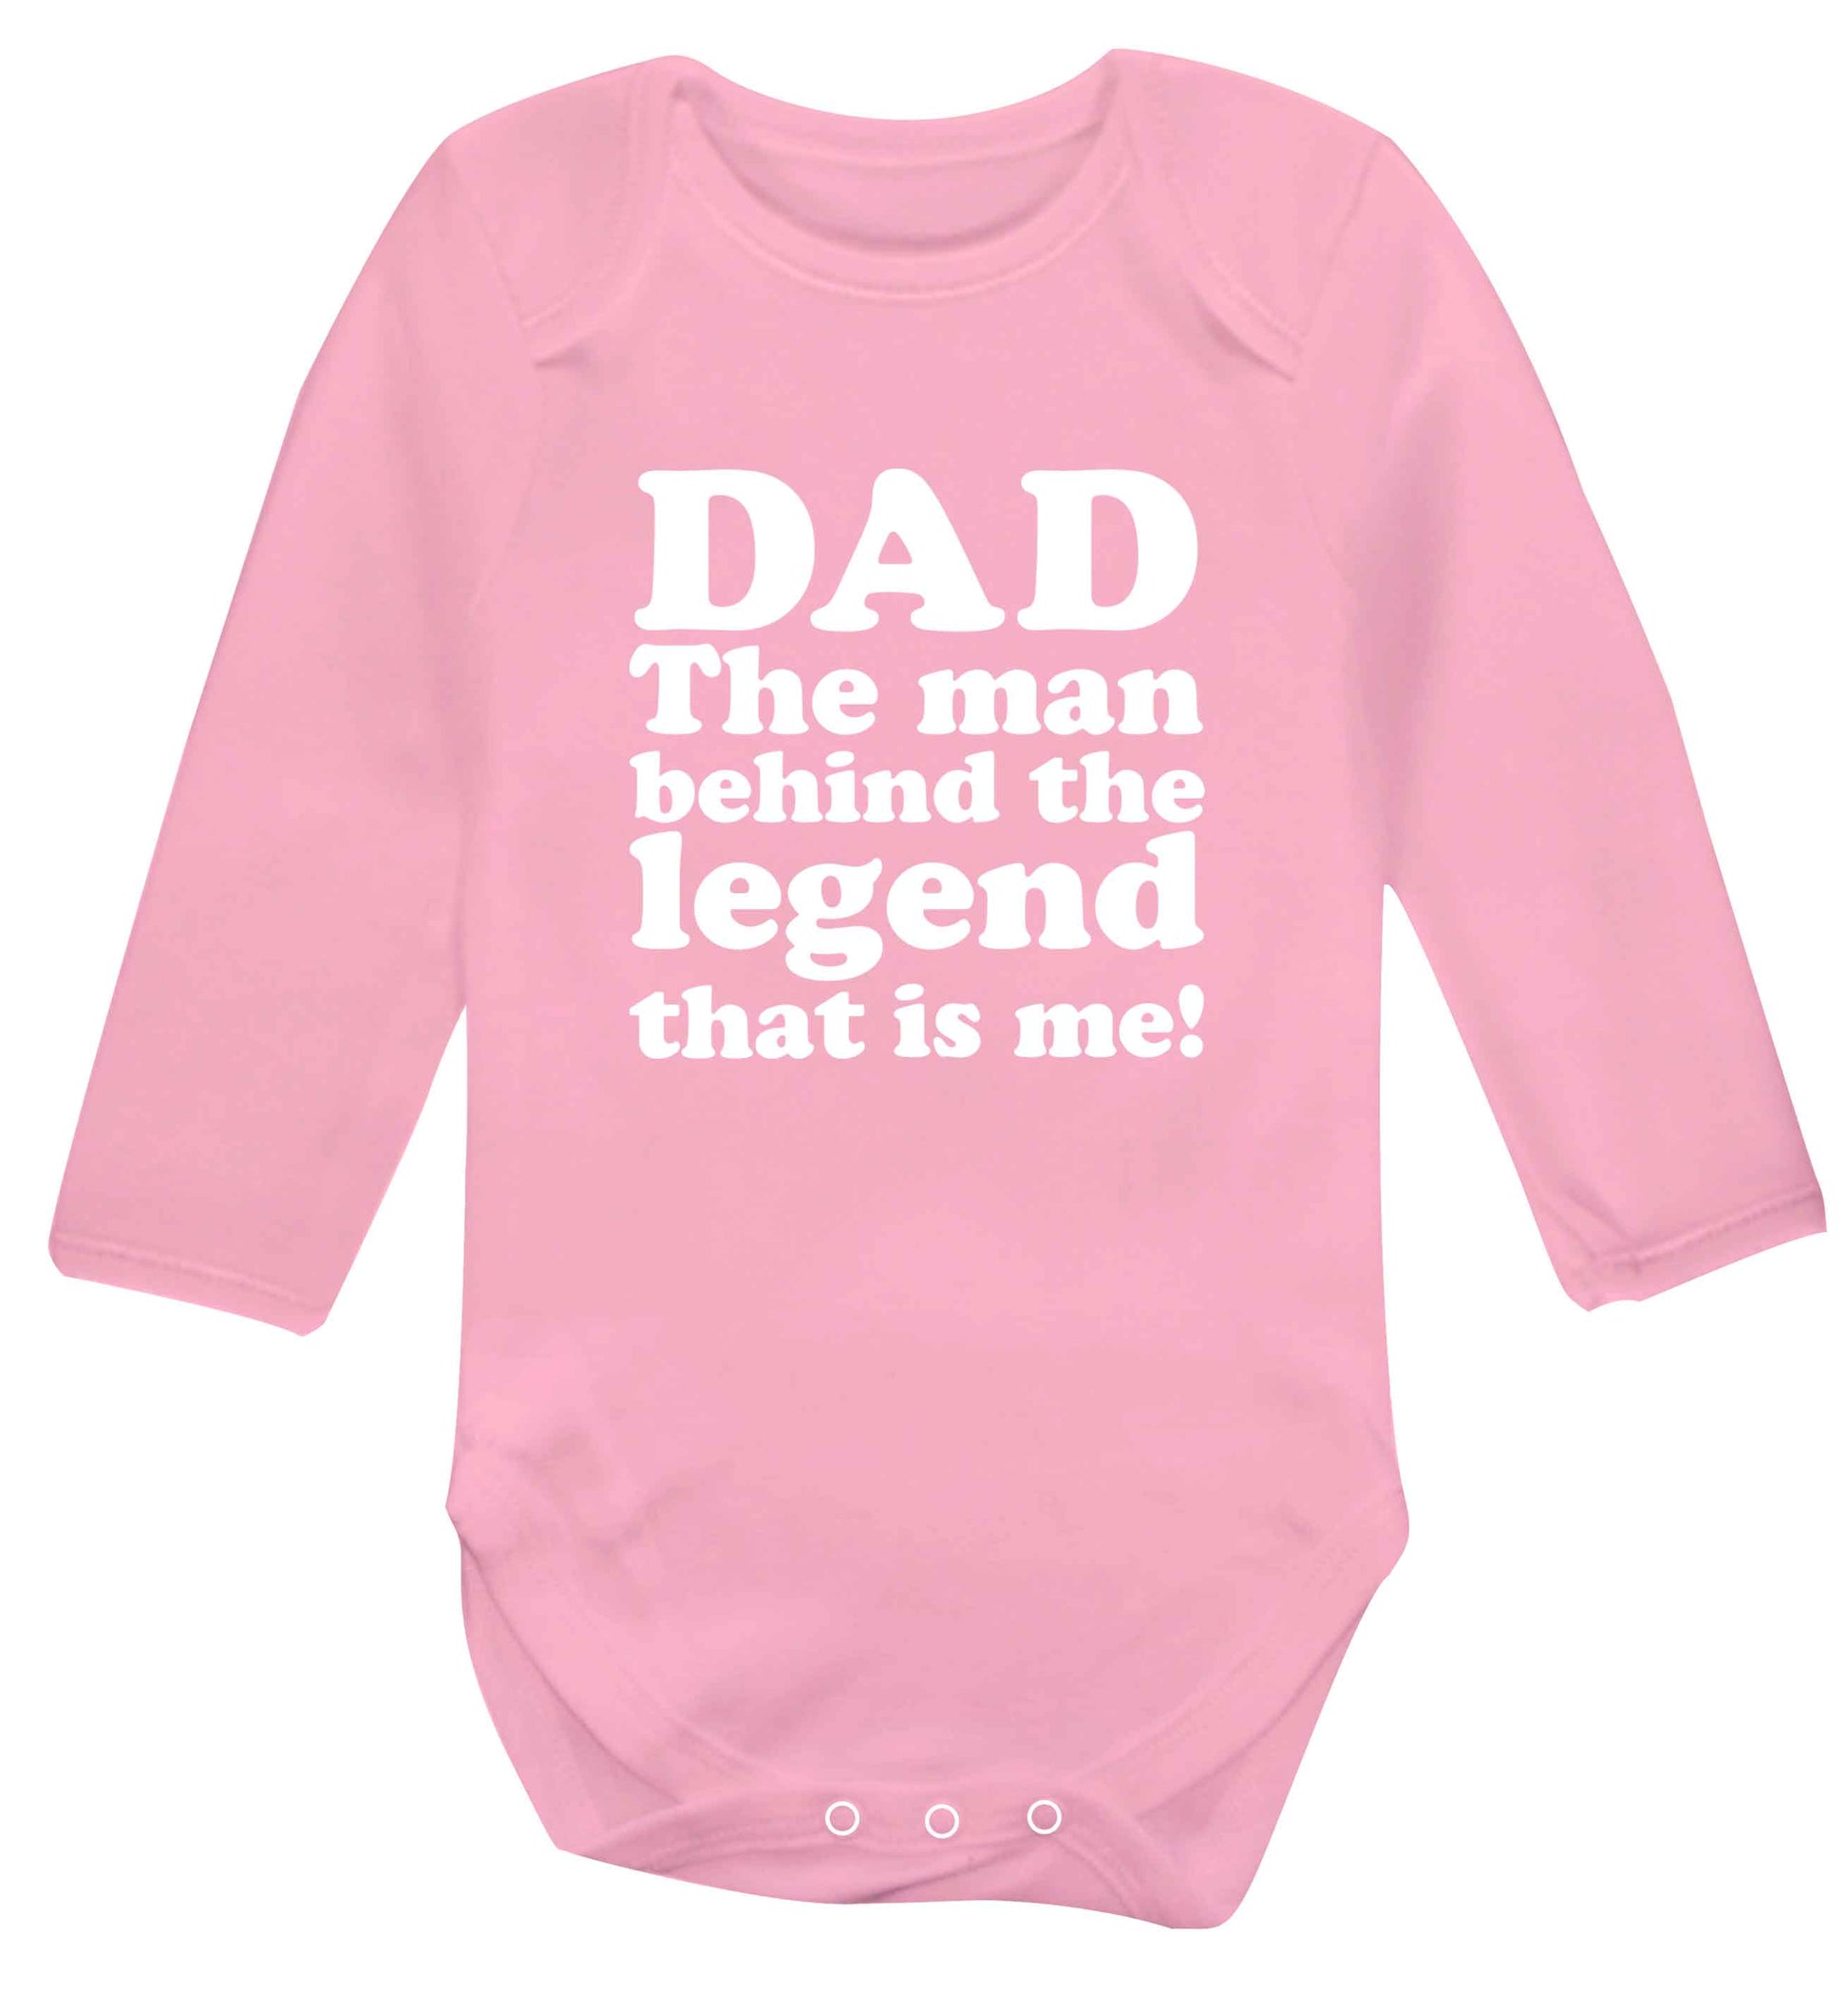 Dad the man behind the legend that is me baby vest long sleeved pale pink 6-12 months